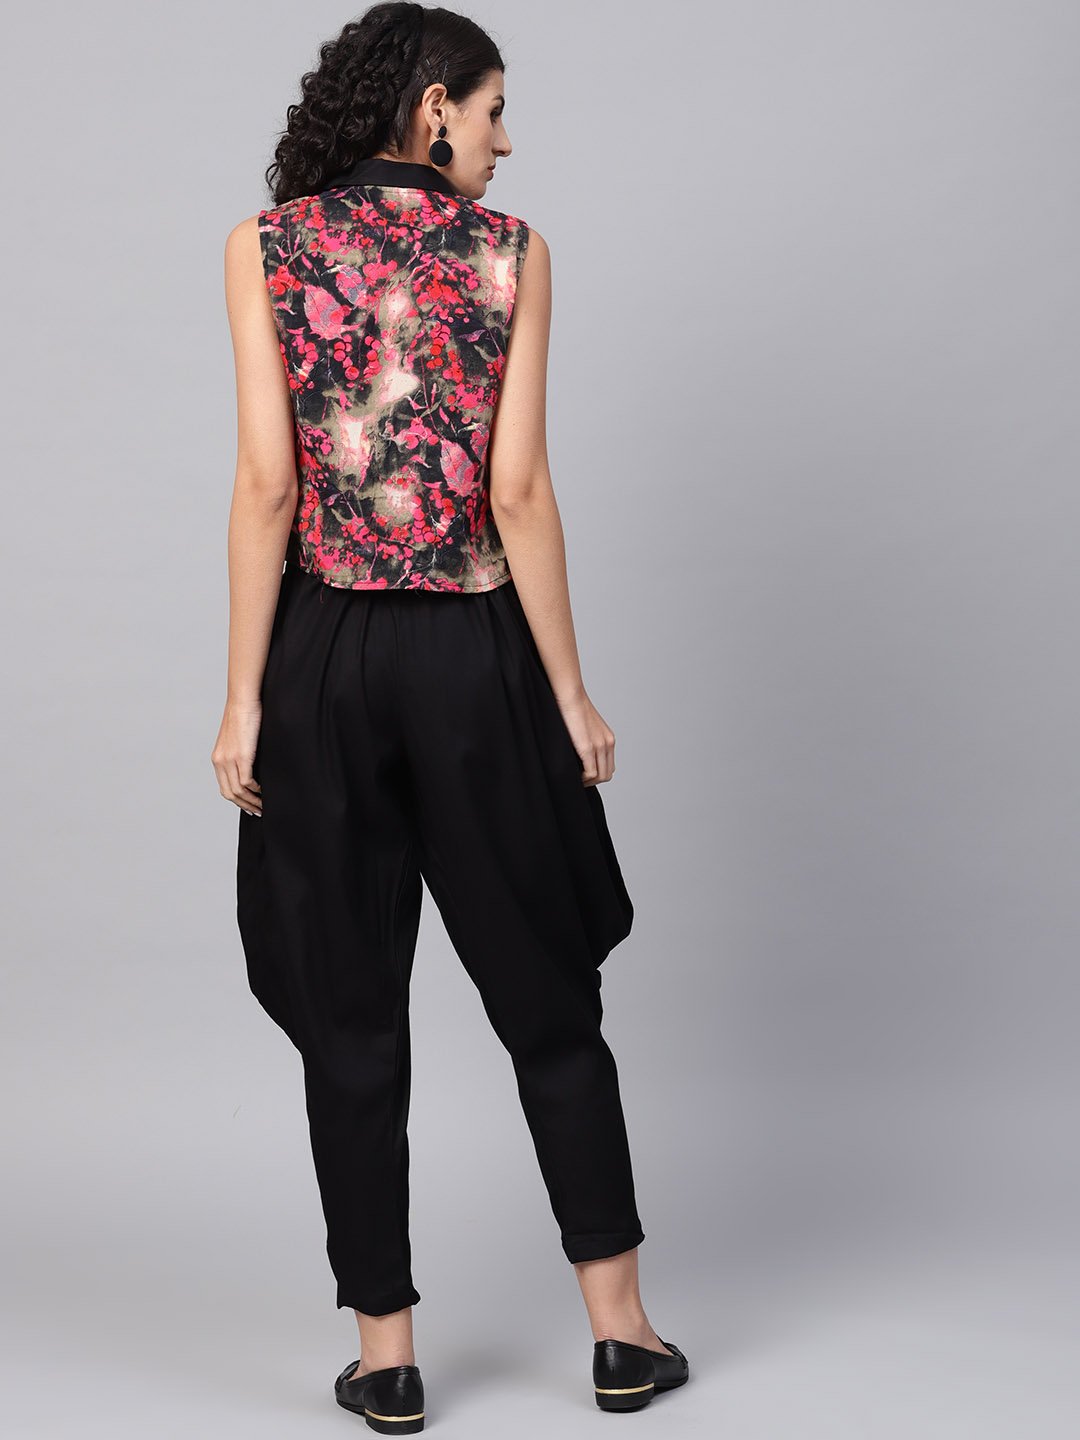 Women's Pink & Black Printed Sleeveless Tops With Black Ankle Length Balloon Pant - Nayo Clothing